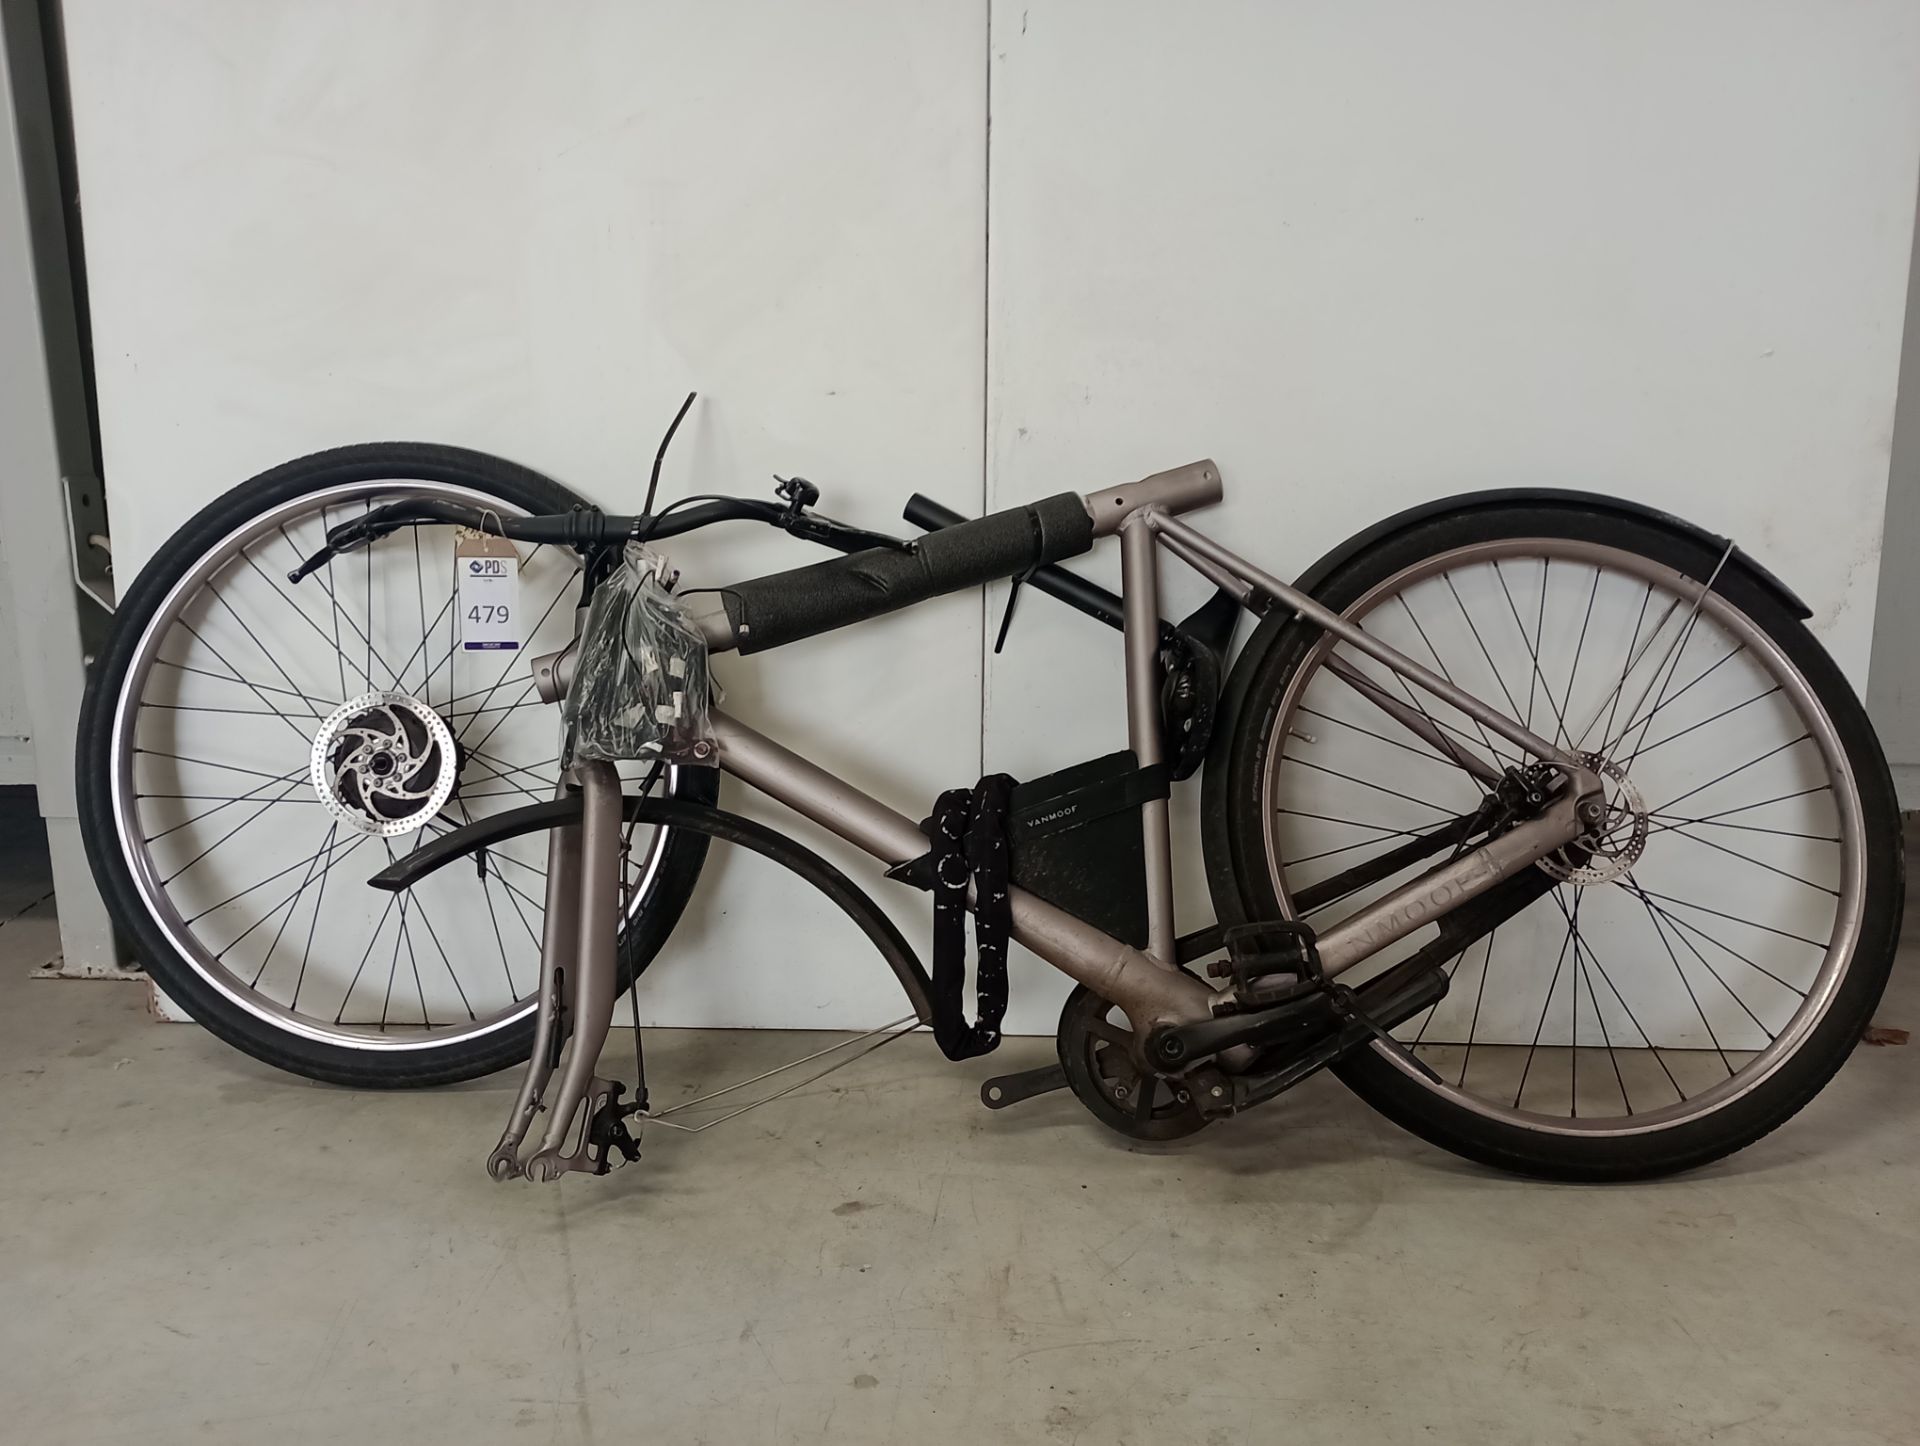 VanMoof Electric Bike, Frame Number ICH70112094 (NOT ROADWORTHY - FOR SPARES ONLY) (No codes